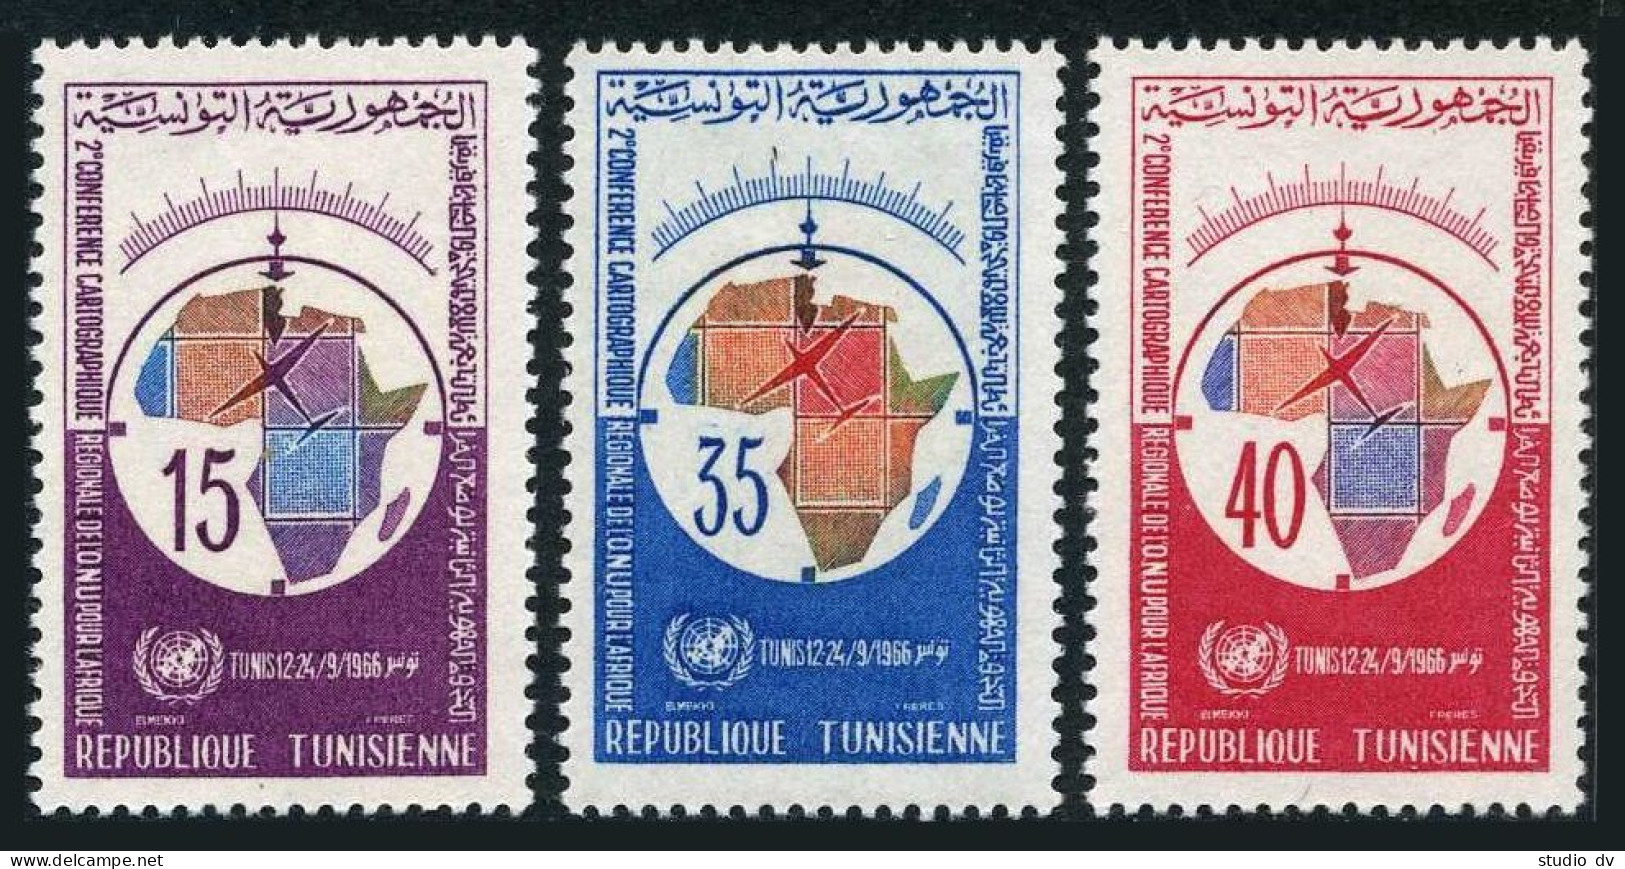 Tunisia 464-466, MNH. Michel 664-666. Cartographic Conference For Africa, 1966. - Tunisie (1956-...)